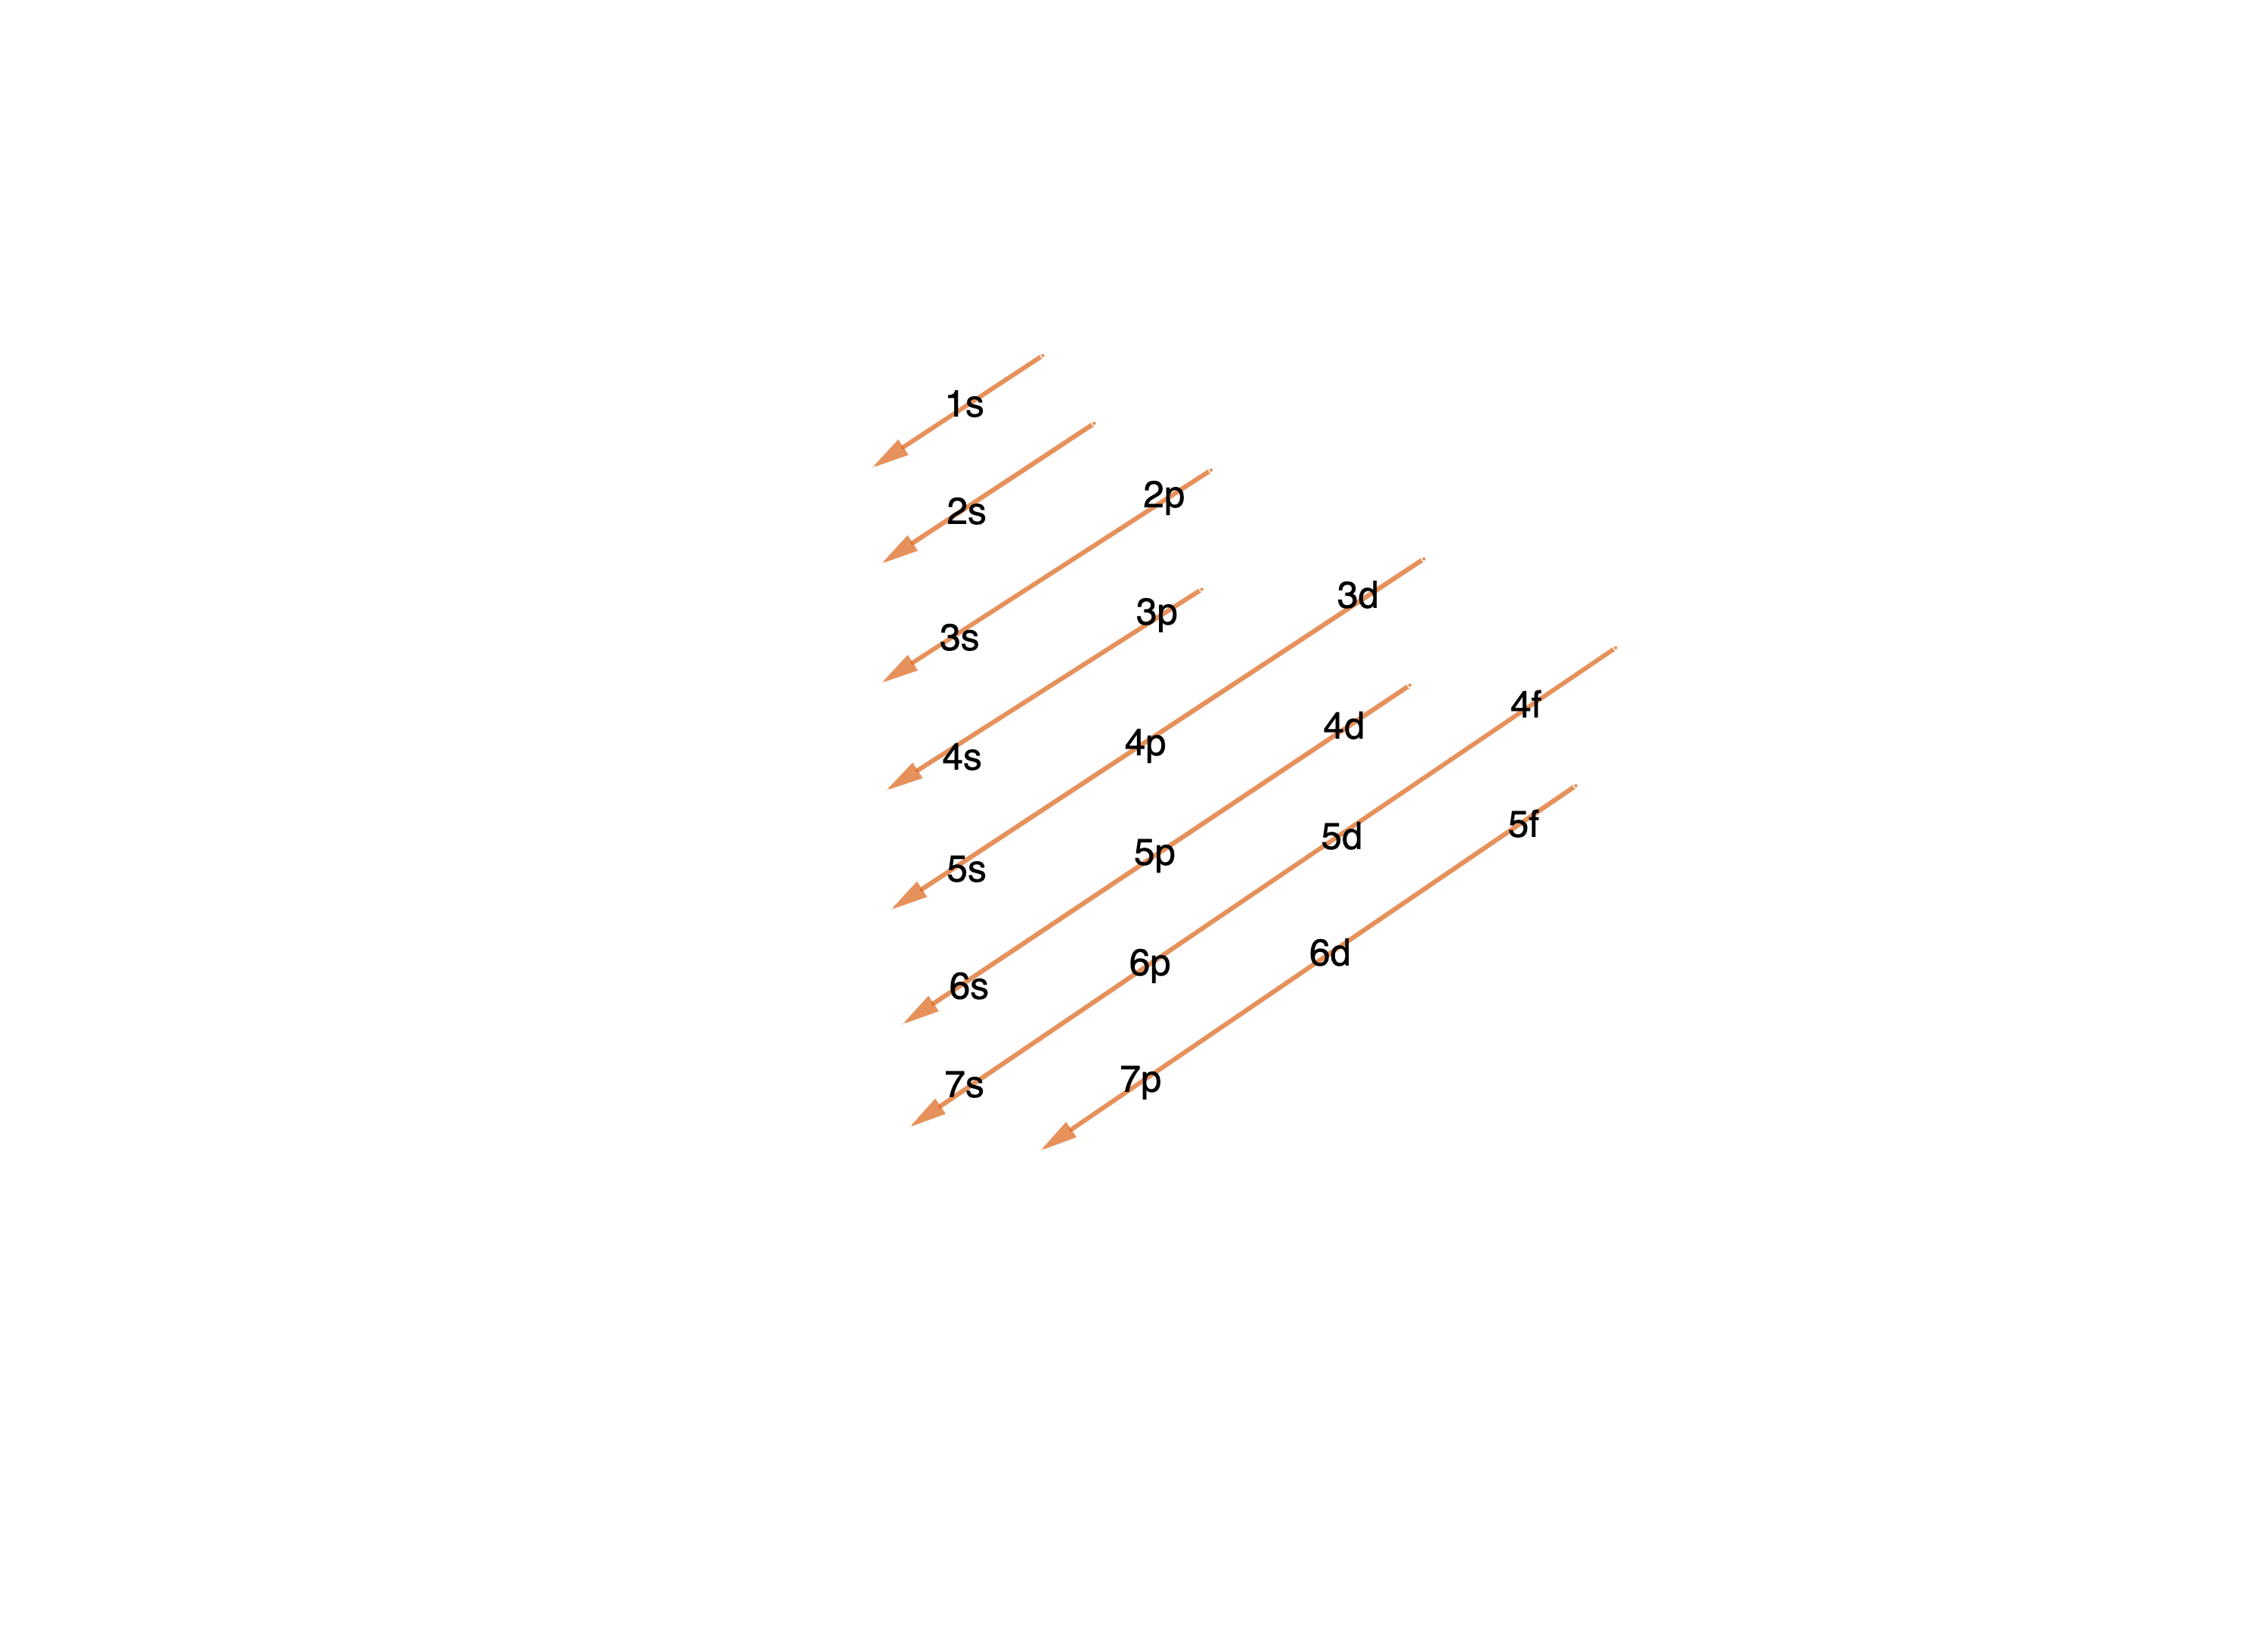 ../../_images/Subshells_in_order_of_the_diagonal_lines.png